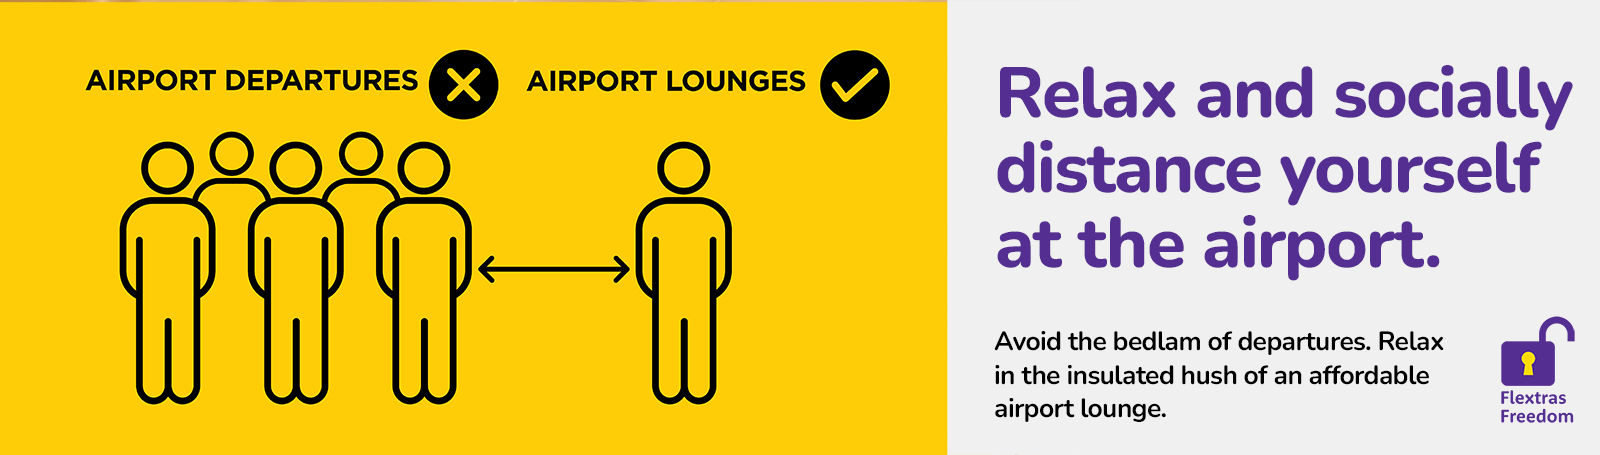 airport lounges relax and socially distance yourself at the airport